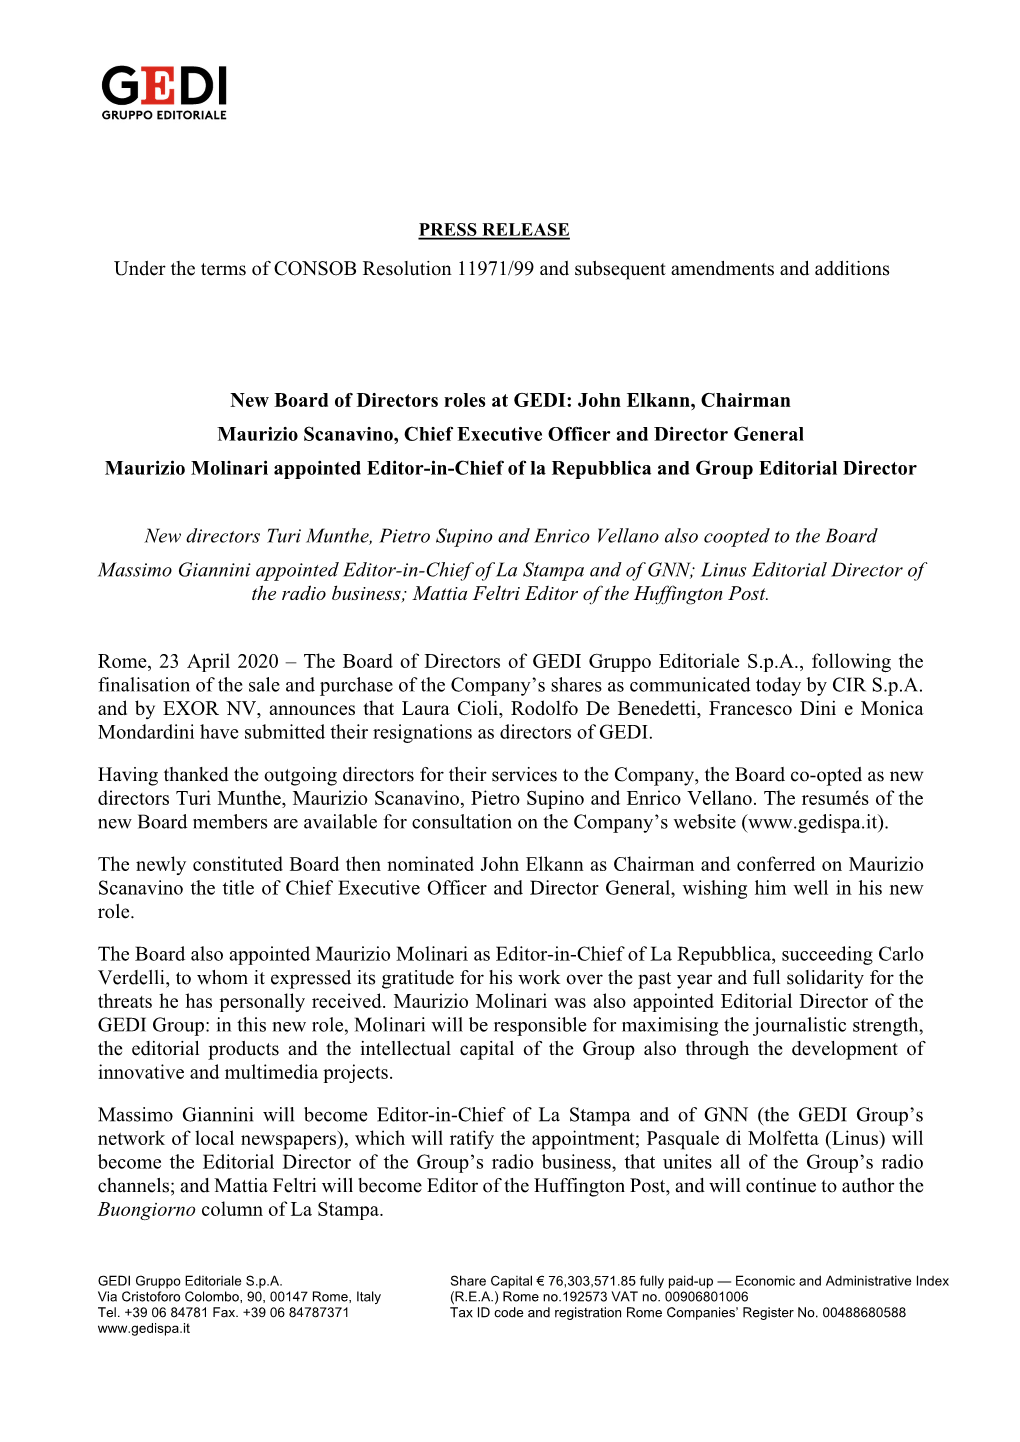 PRESS RELEASE Under the Terms of CONSOB Resolution 11971/99 and Subsequent Amendments and Additions